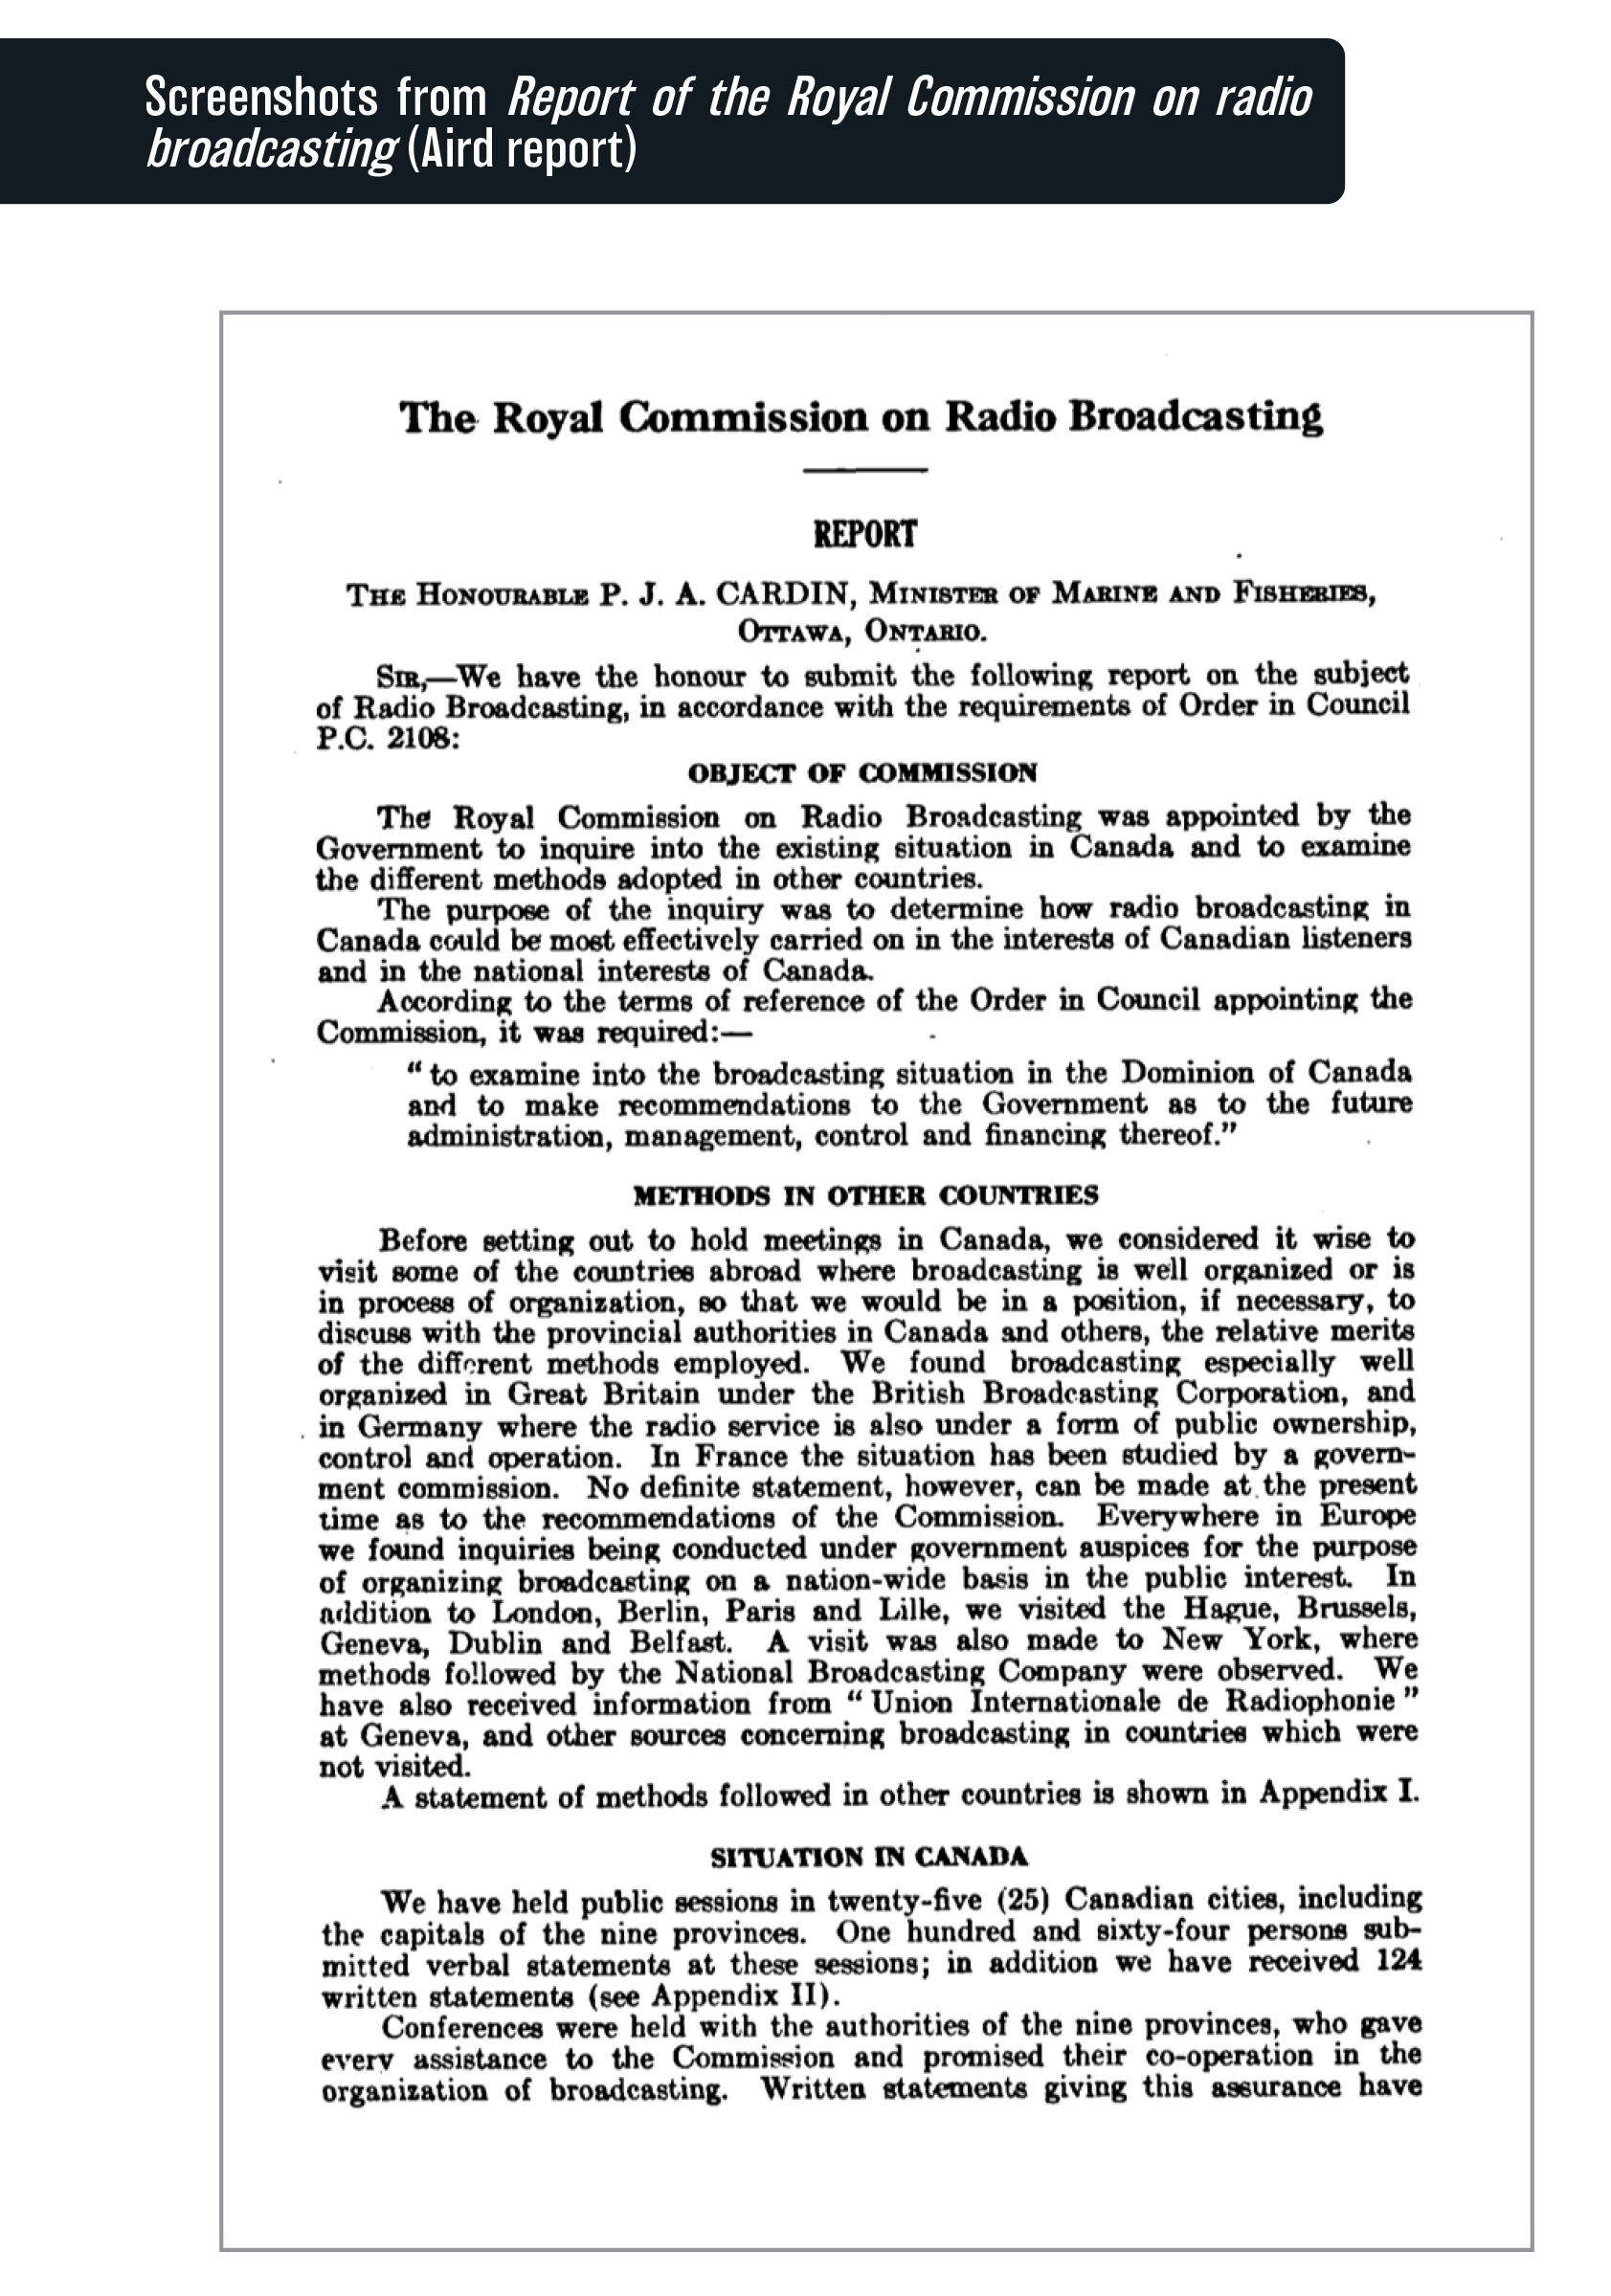 Figure 5.2: Screenshots from Report of the Royal Commission on radio broadcasting (Aird report)